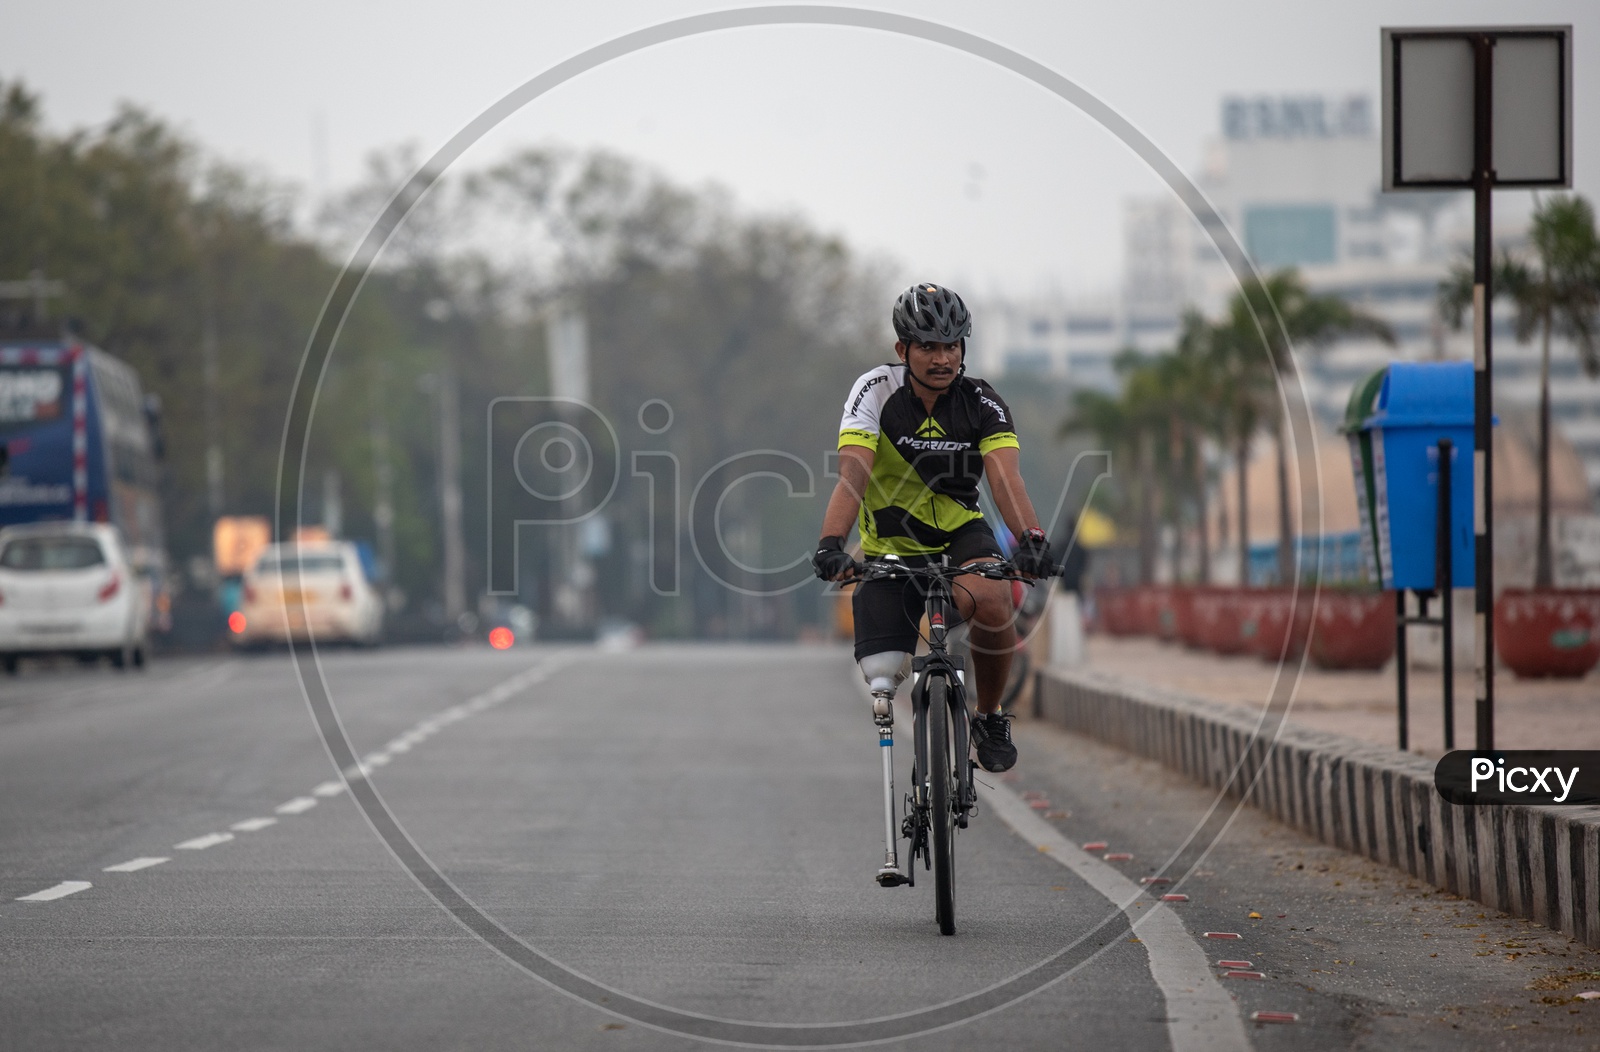 Physically Challenged Man With Leg Prosthesis Cycling on Tankbund